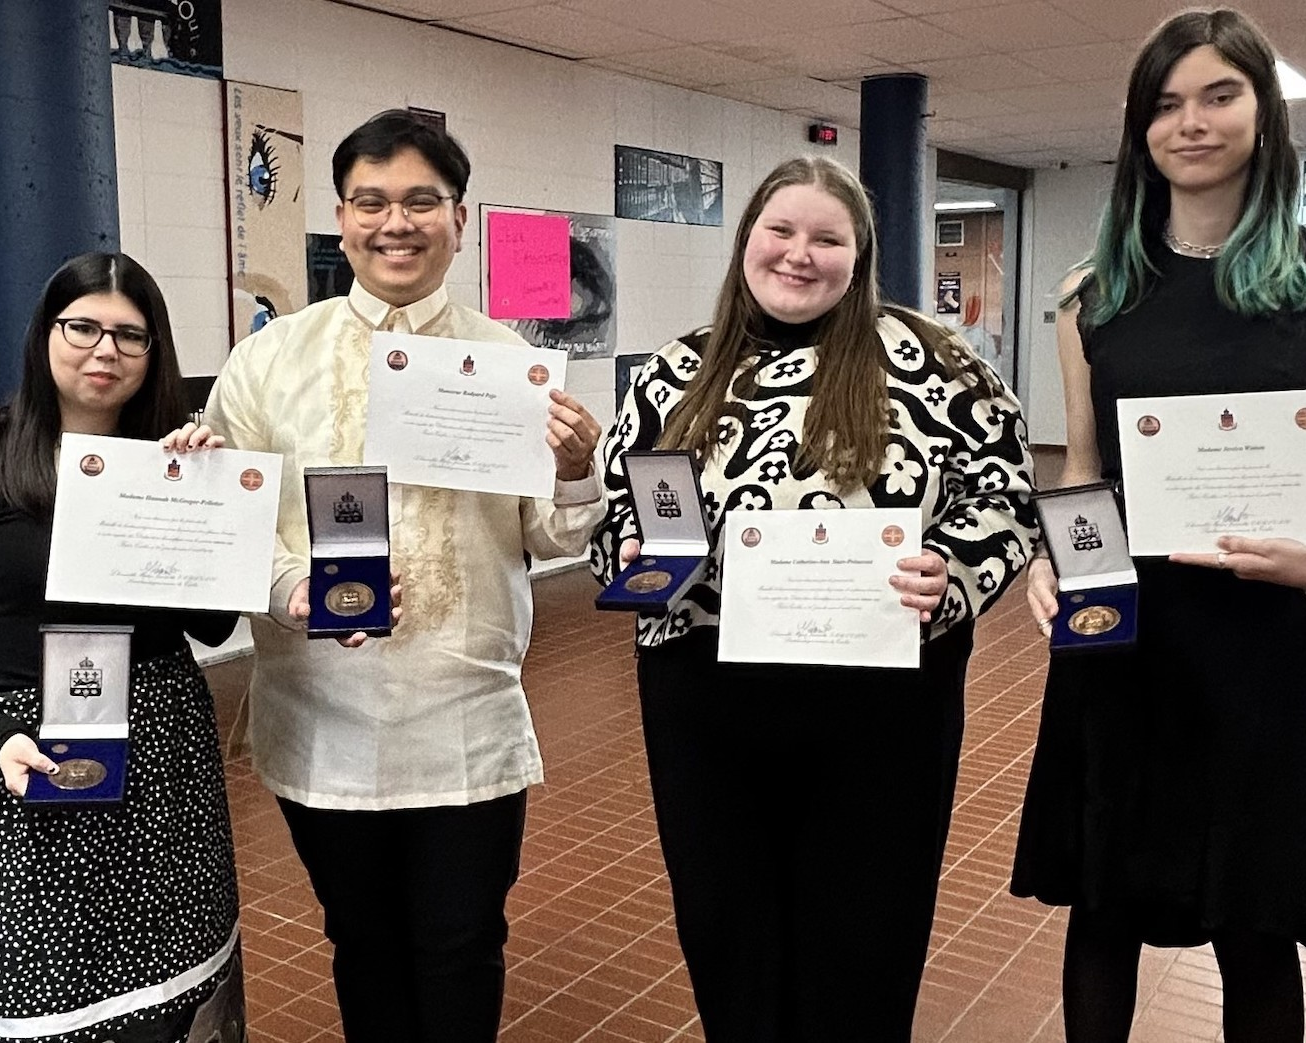 Meet Concordia’s 4 winners of the Quebec Lieutenant Governor’s Youth Medal